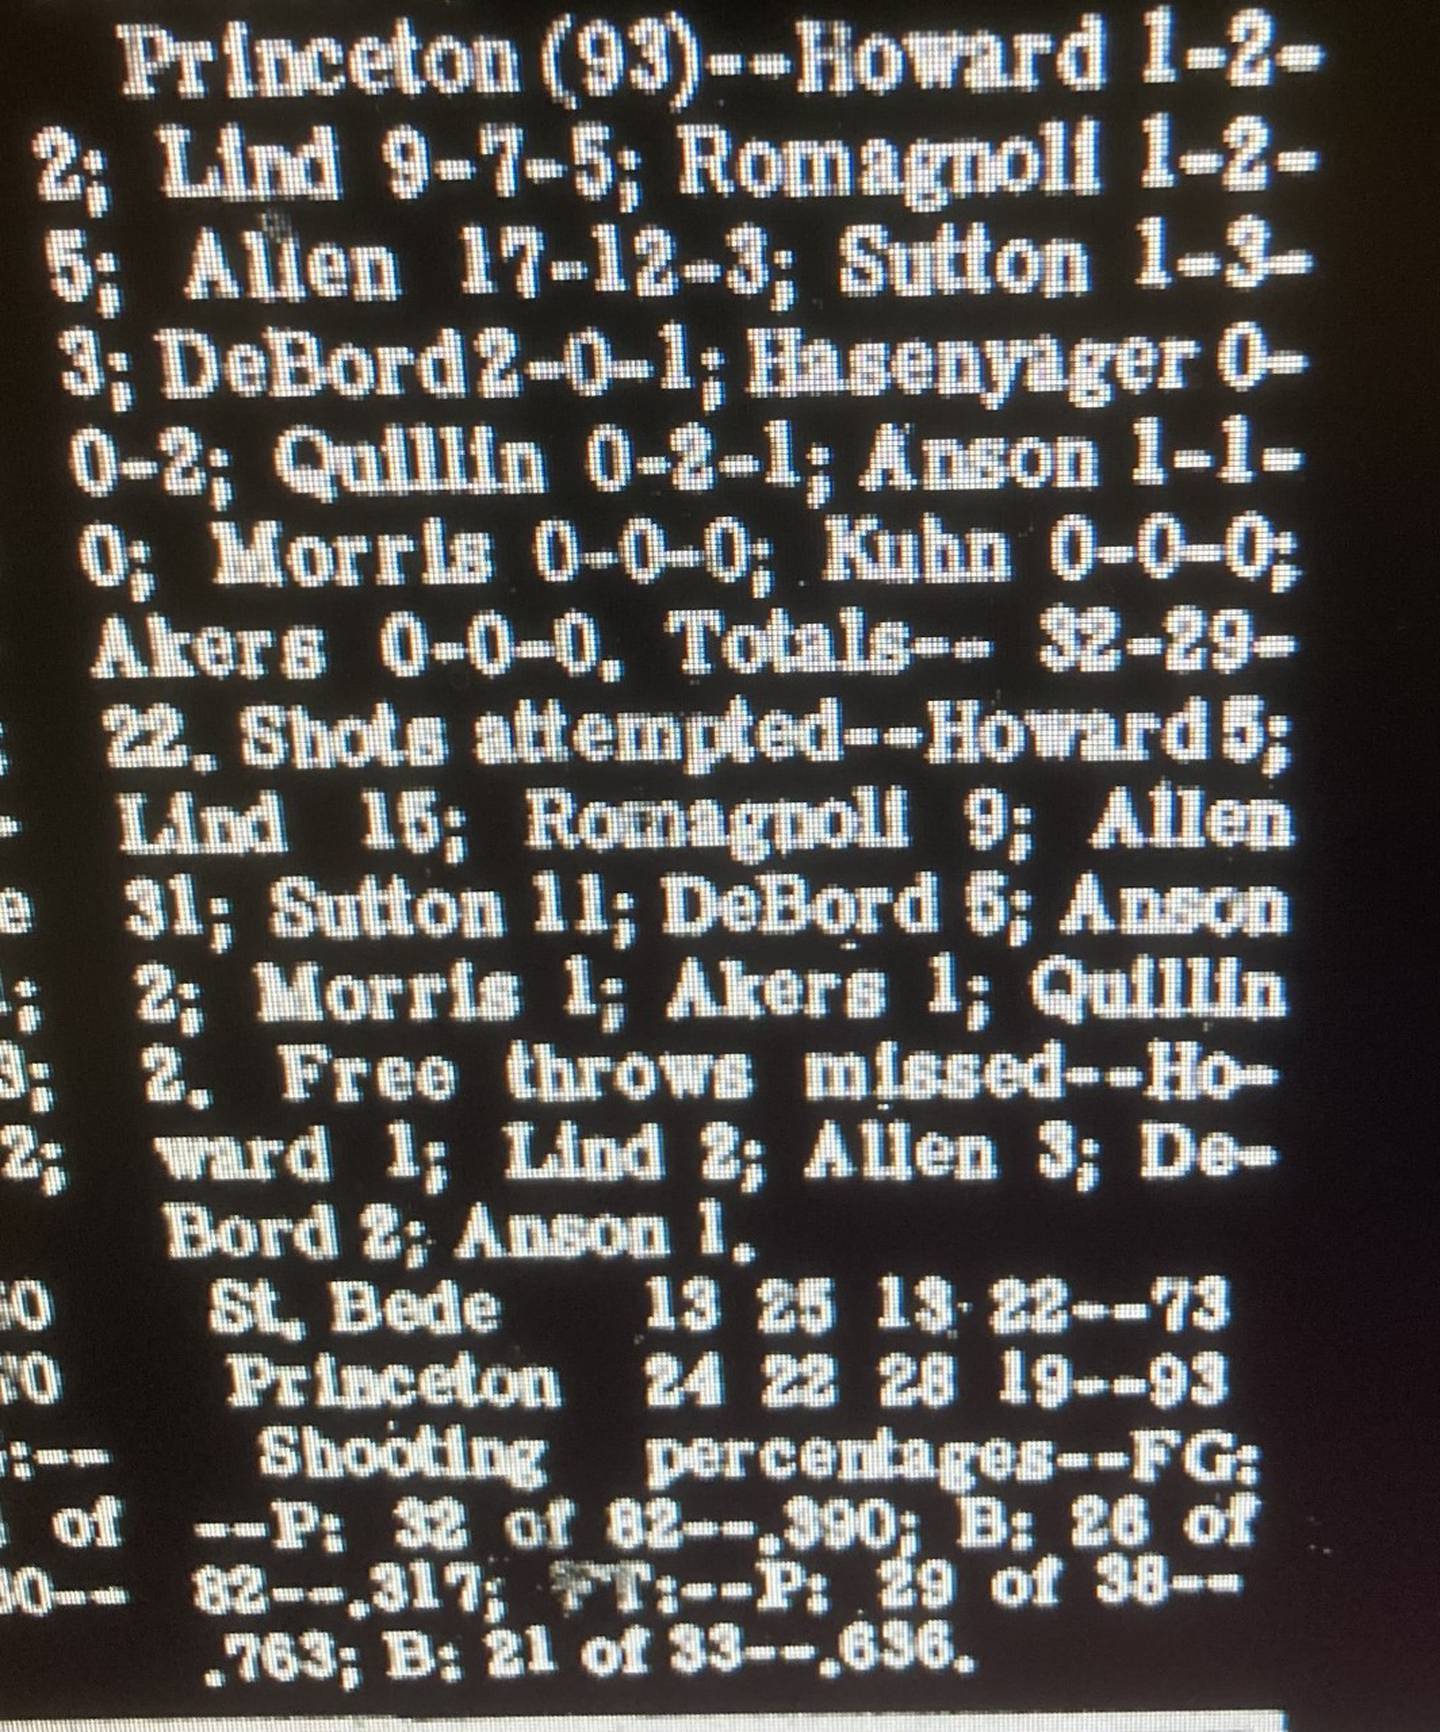 Here is the boxscore from Feb. 7, 1970, when Princeton senior Rick Allen scored a school record 46 points against St. Bede. His linescore was 17 of 31 field attempts and 12 of 15 free throw attemps.